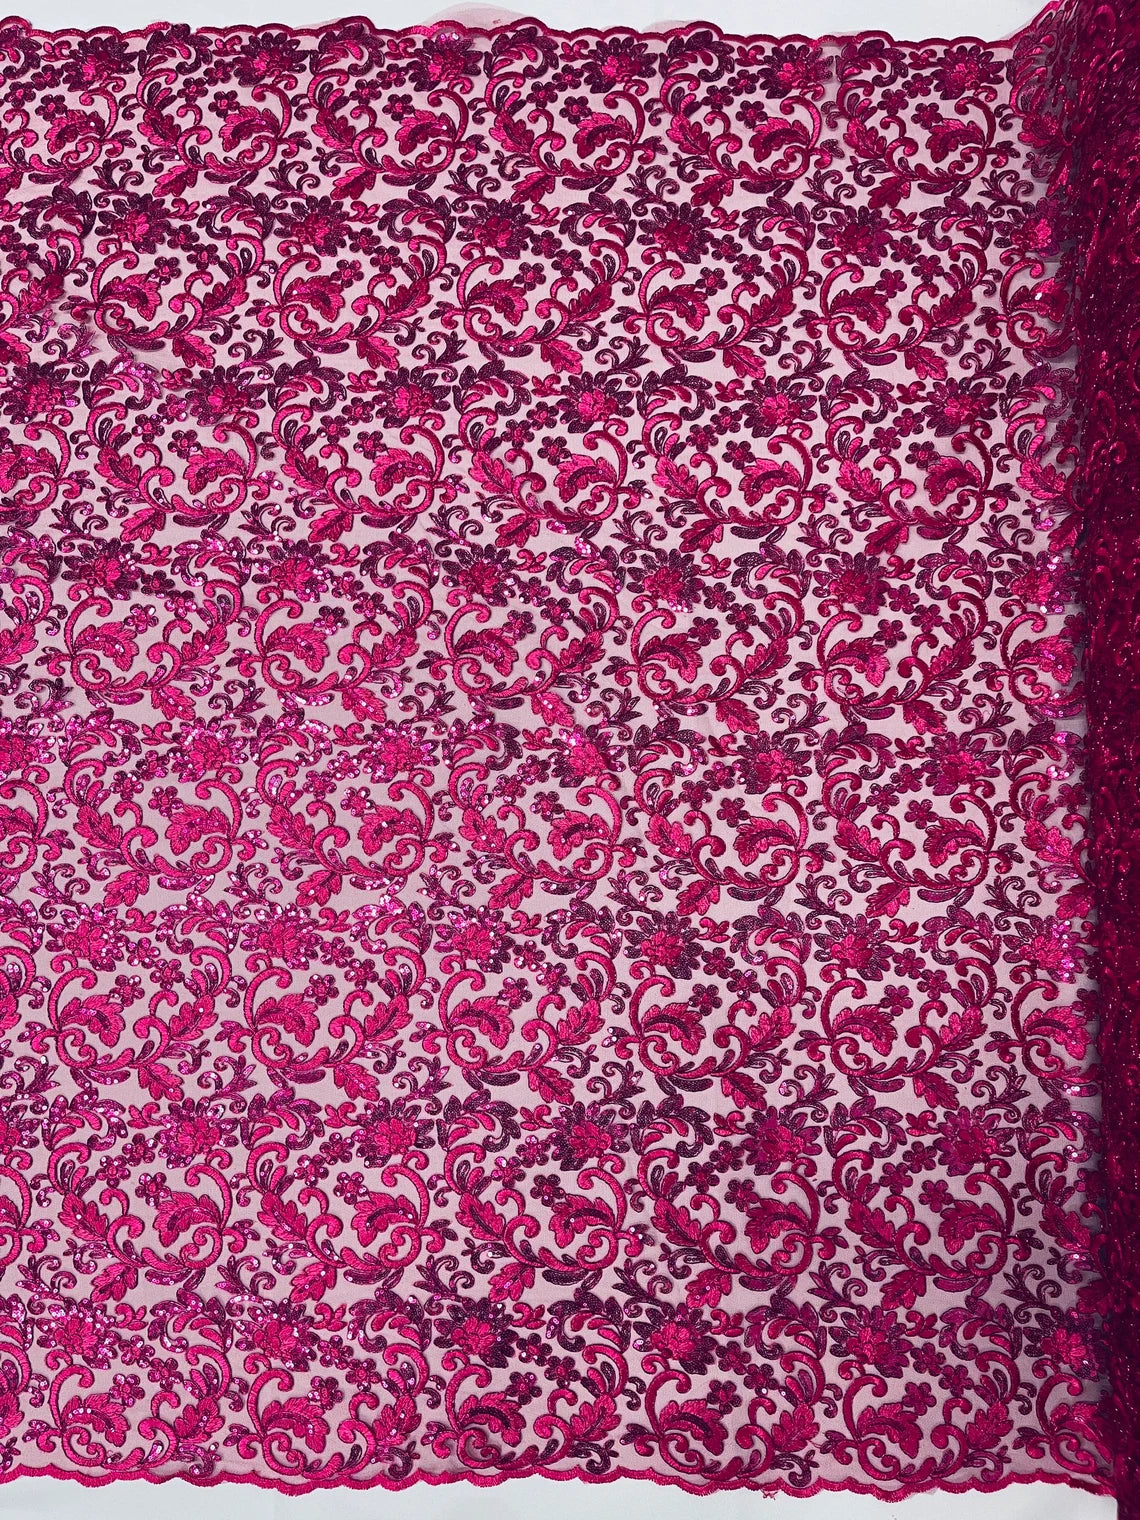 Metallic Floral Lace Fabric - Fuchsia - Embroidered Sequins Floral Des